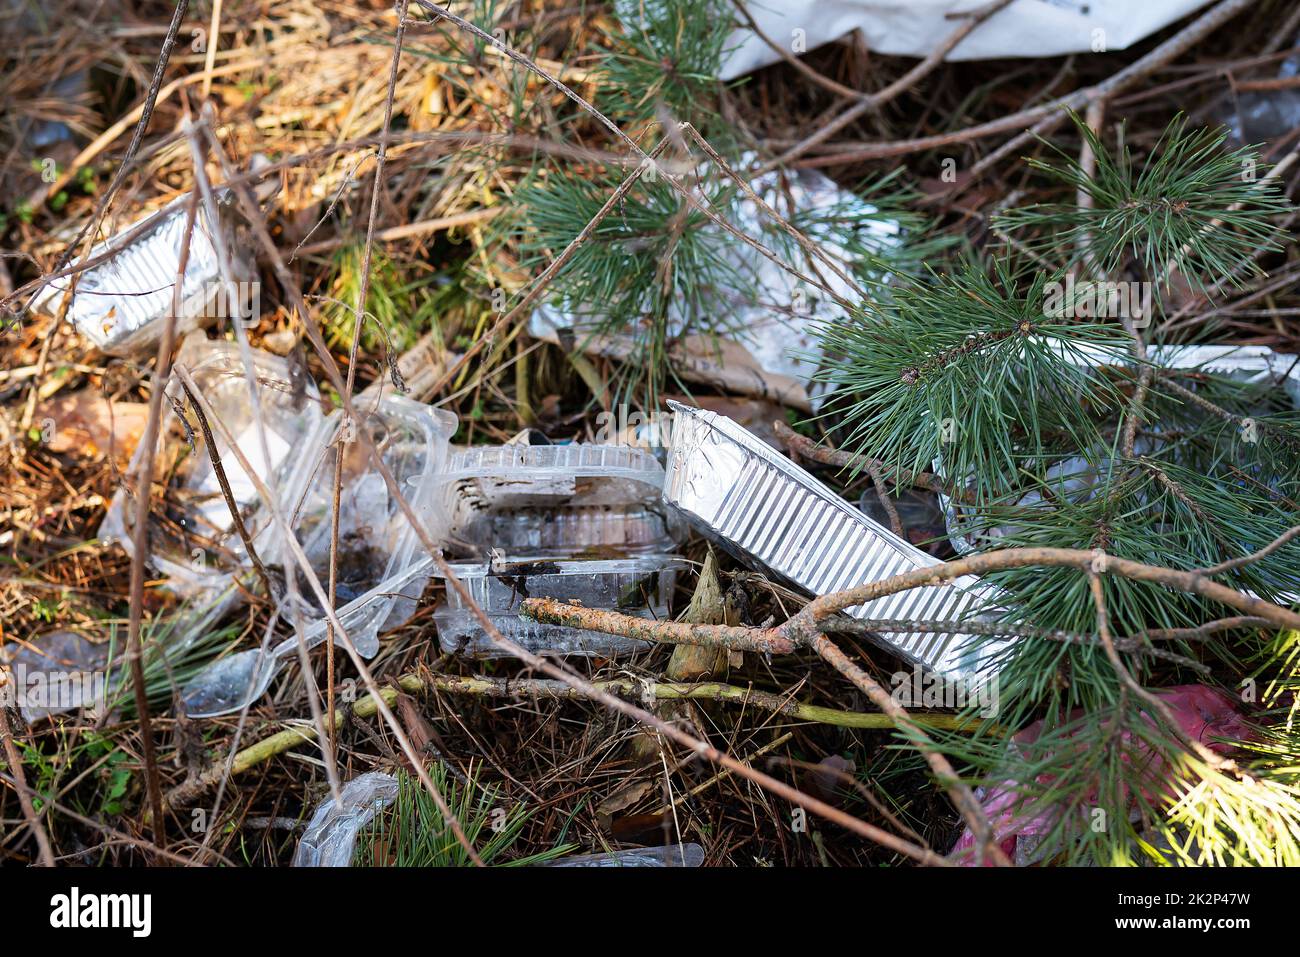 A lot of plastic disposable containers, waste lies in a thick layer in the wilderness, attracting birds and rodents. Environmental pollution. Stock Photo